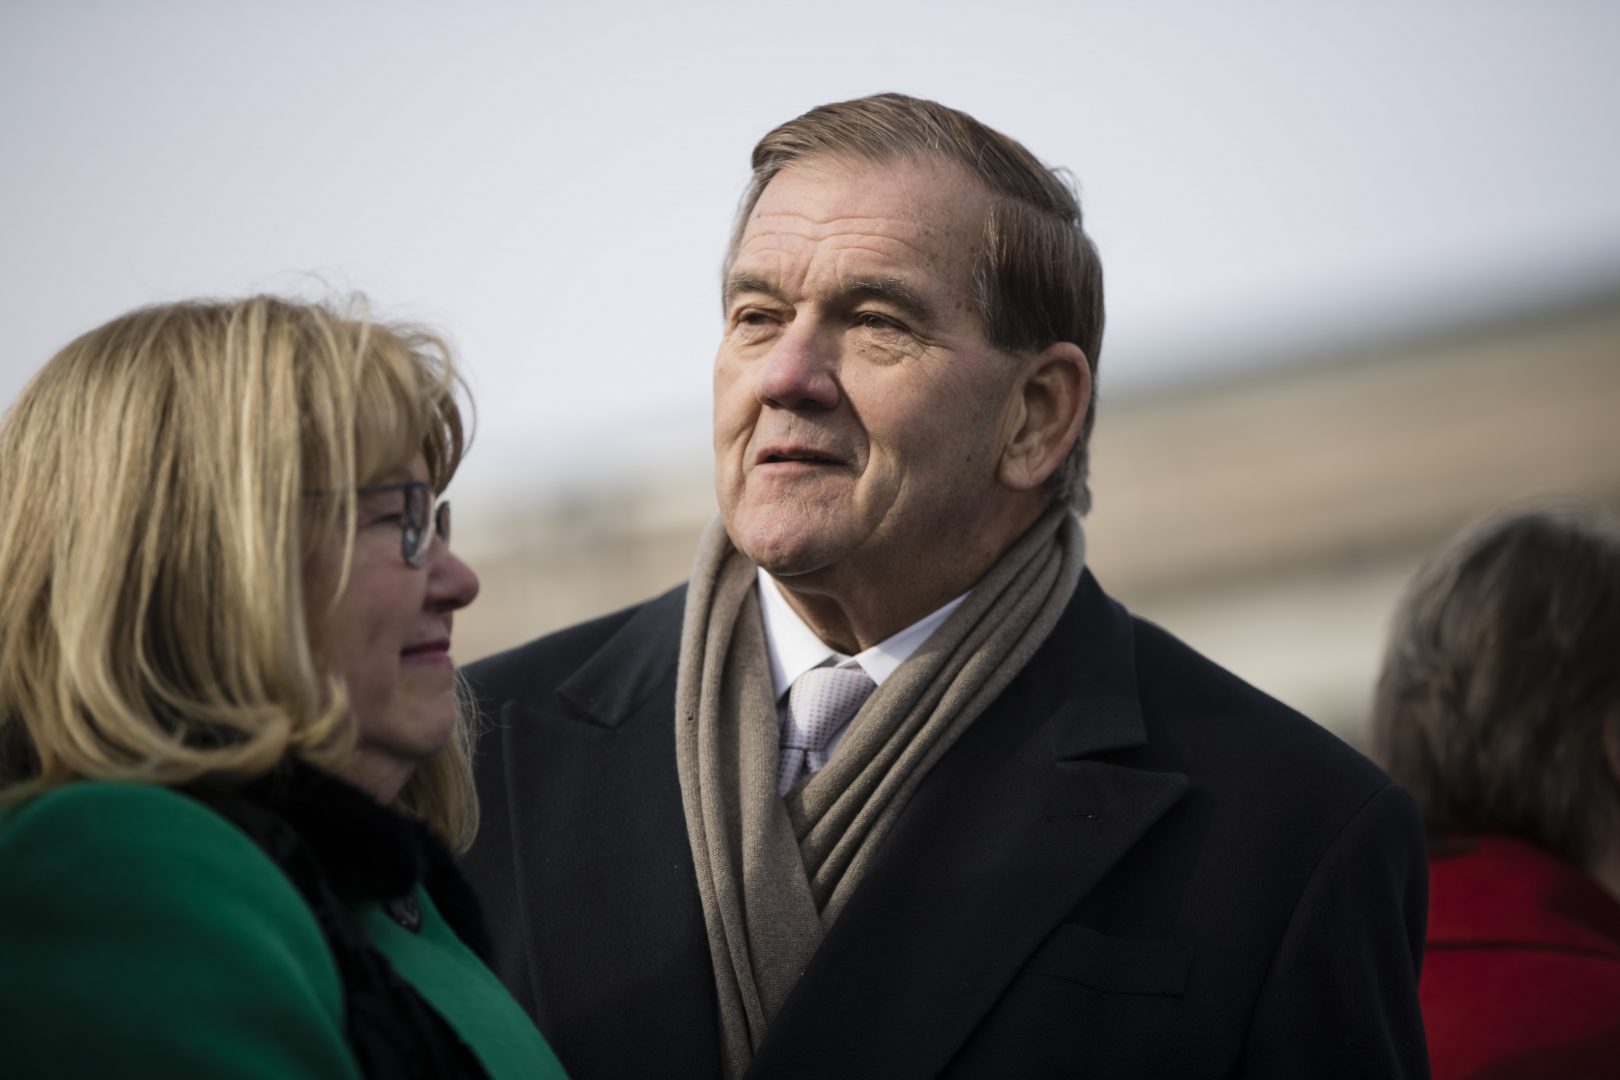 FILE PHOTO: Former Gov. Tom Ridge before Pennsylvania Gov. Tom Wolf takes the oath of office for his second term, on Tuesday, Jan. 15, 2019, at the state Capitol in Harrisburg, Pa.